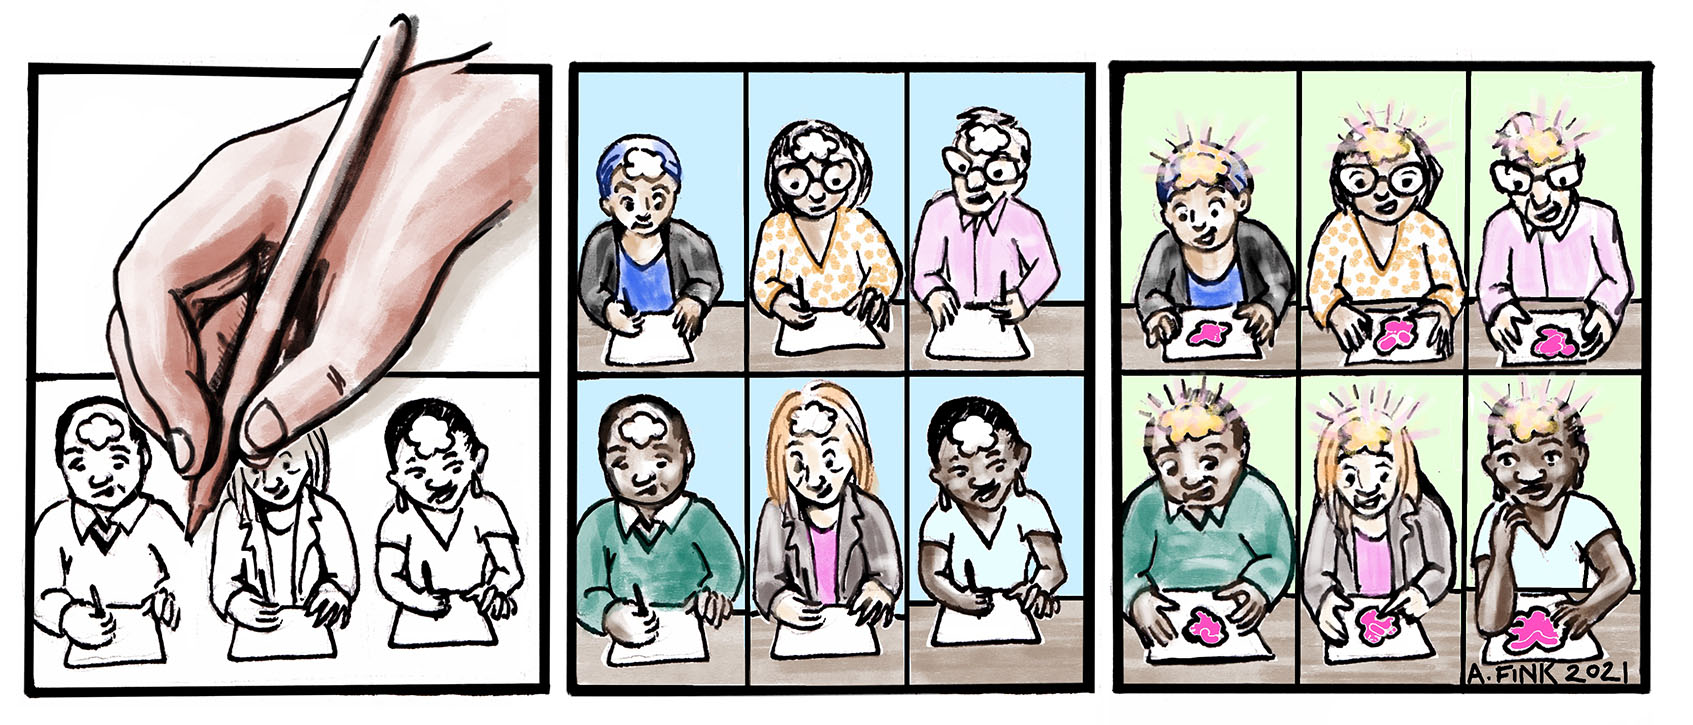 A three-panel comic. Panel 1: A hand is sketching an incomplete panel containing a row of 3 people, like a Zoom call. Panel 2: A full square of 6 people, drawing together and thinking. Panel 3: The 6 people finished their drawings. Their brains are glowing!